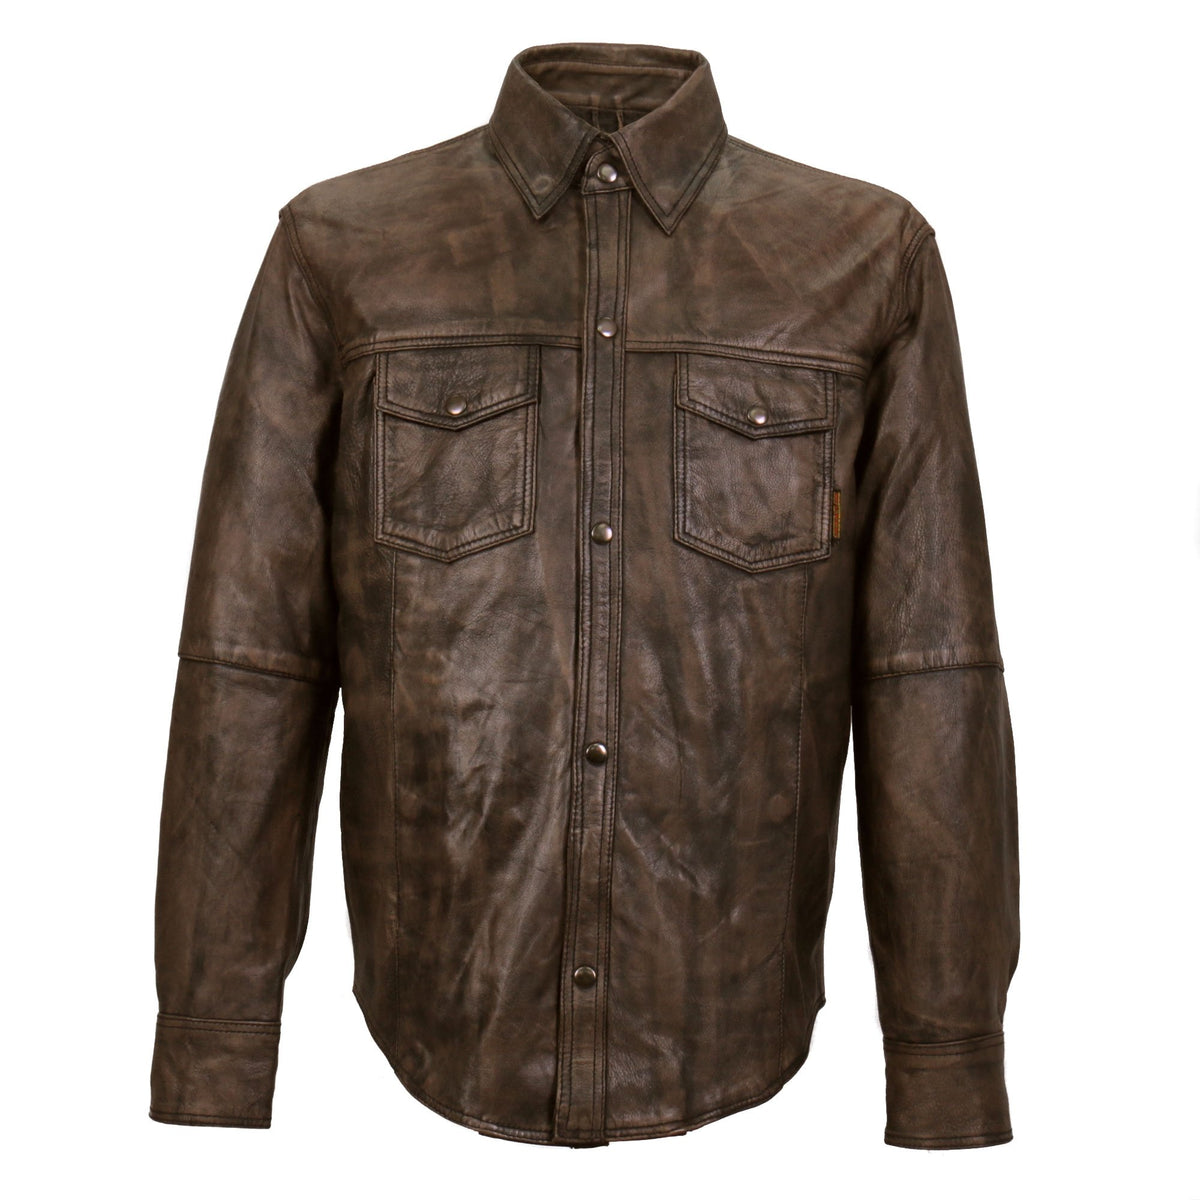 Hot Leathers LCS1004 Mens Distressed Brown Motorcycle style Leather Concealed Carry Biker Shirt